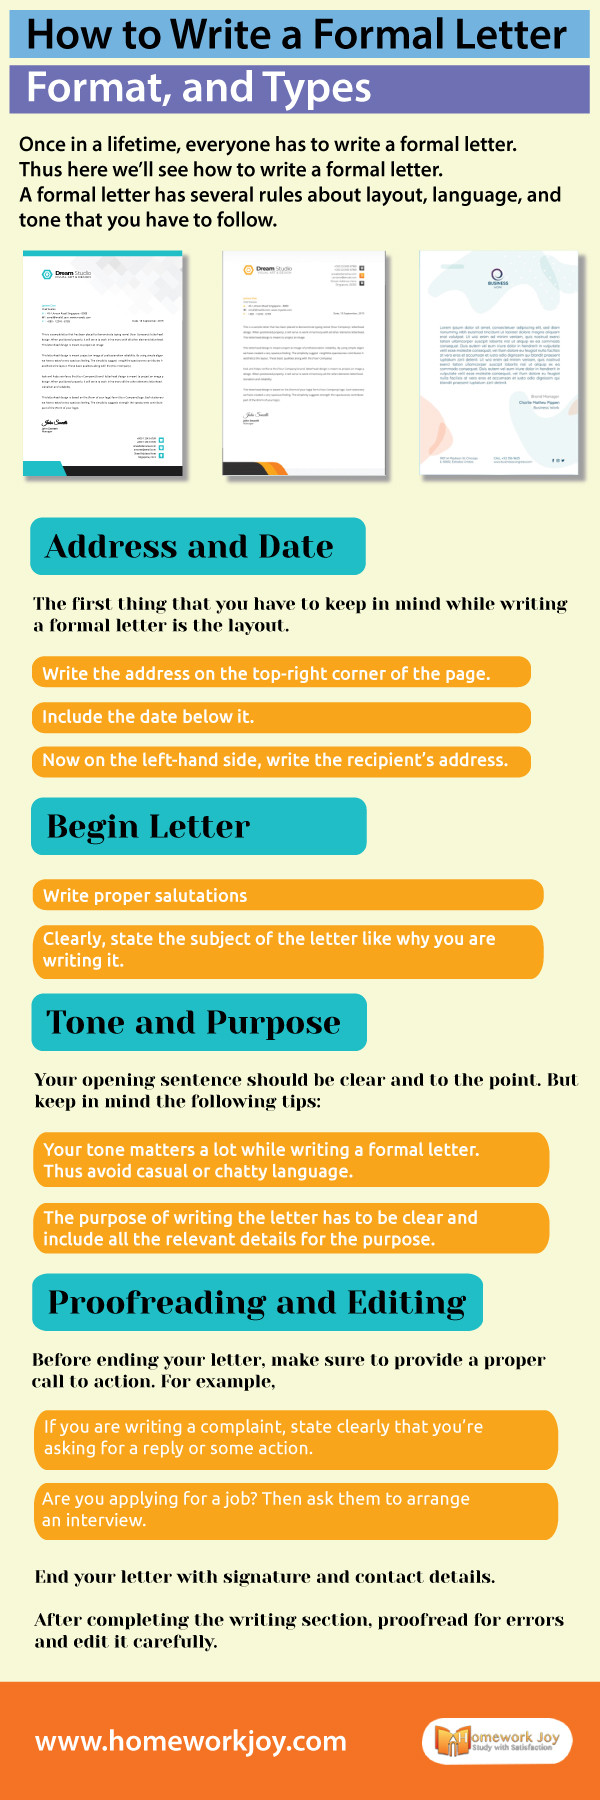 How To Write A Formal Letter Format And Types